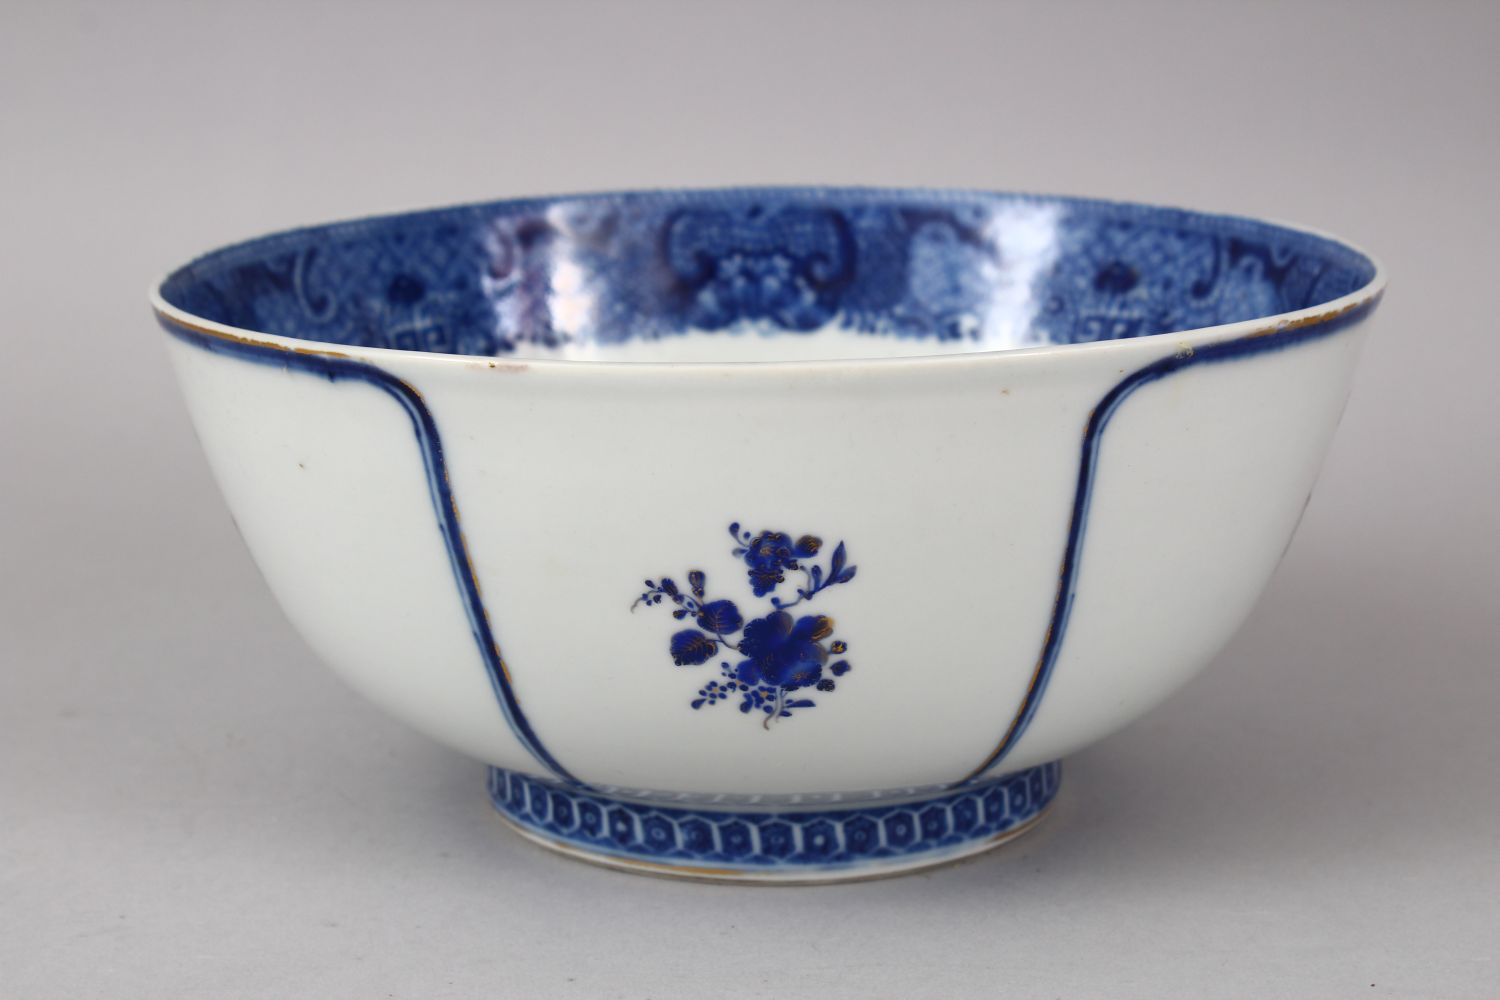 A FINE 18TH CENTURY CHINESE QIANLONG ARMORIAL PORCELAIN BOWL, the bowl with a finely painted band of - Image 4 of 6